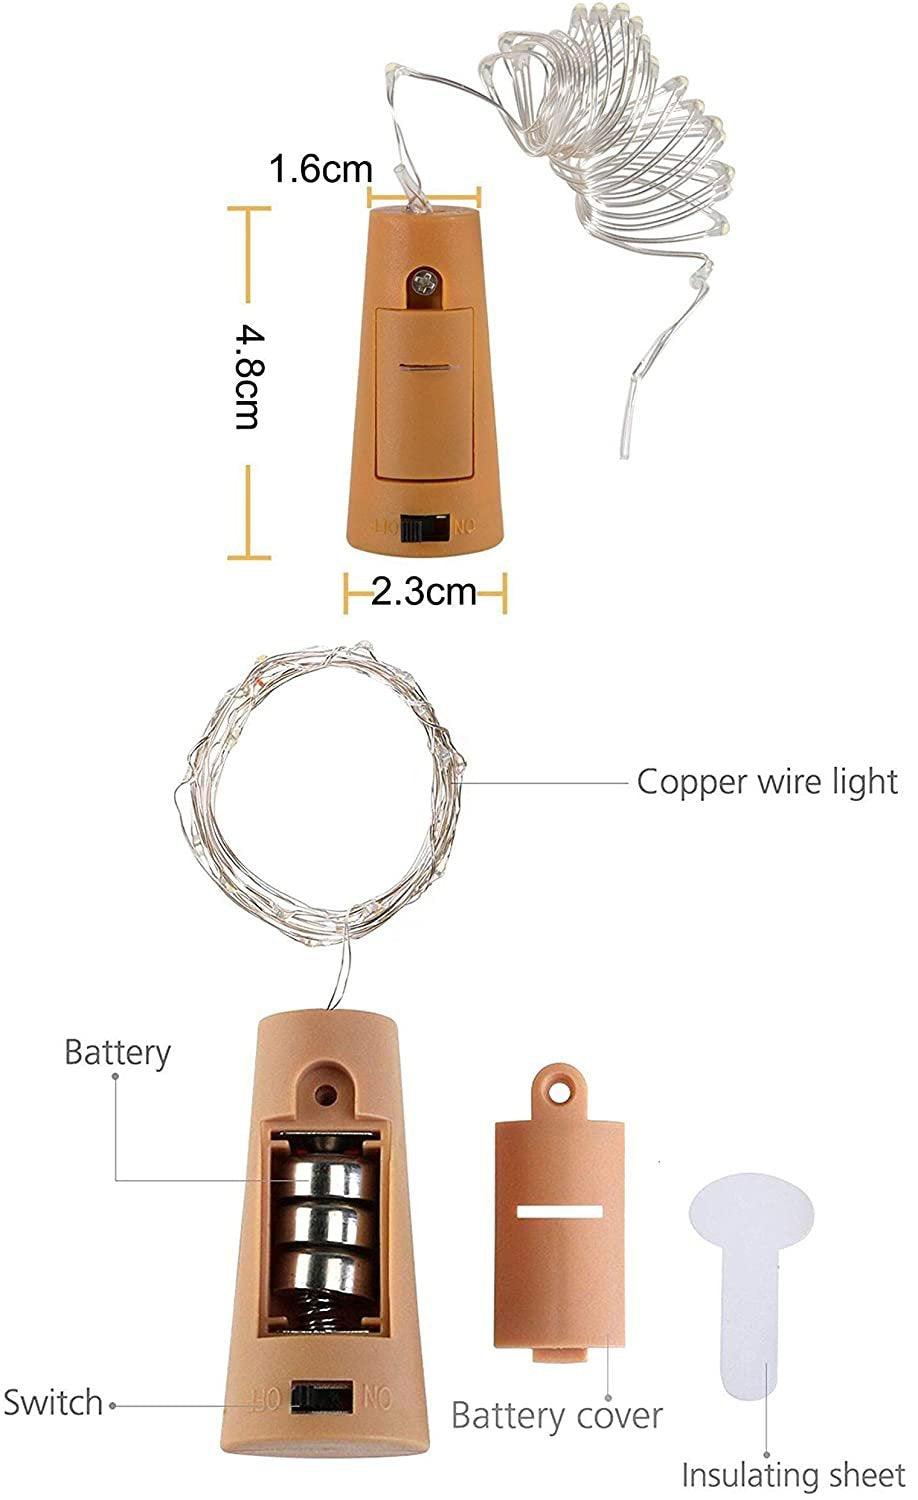 Lamp Sets Wine Bottle Lights with Cork - If you say i do